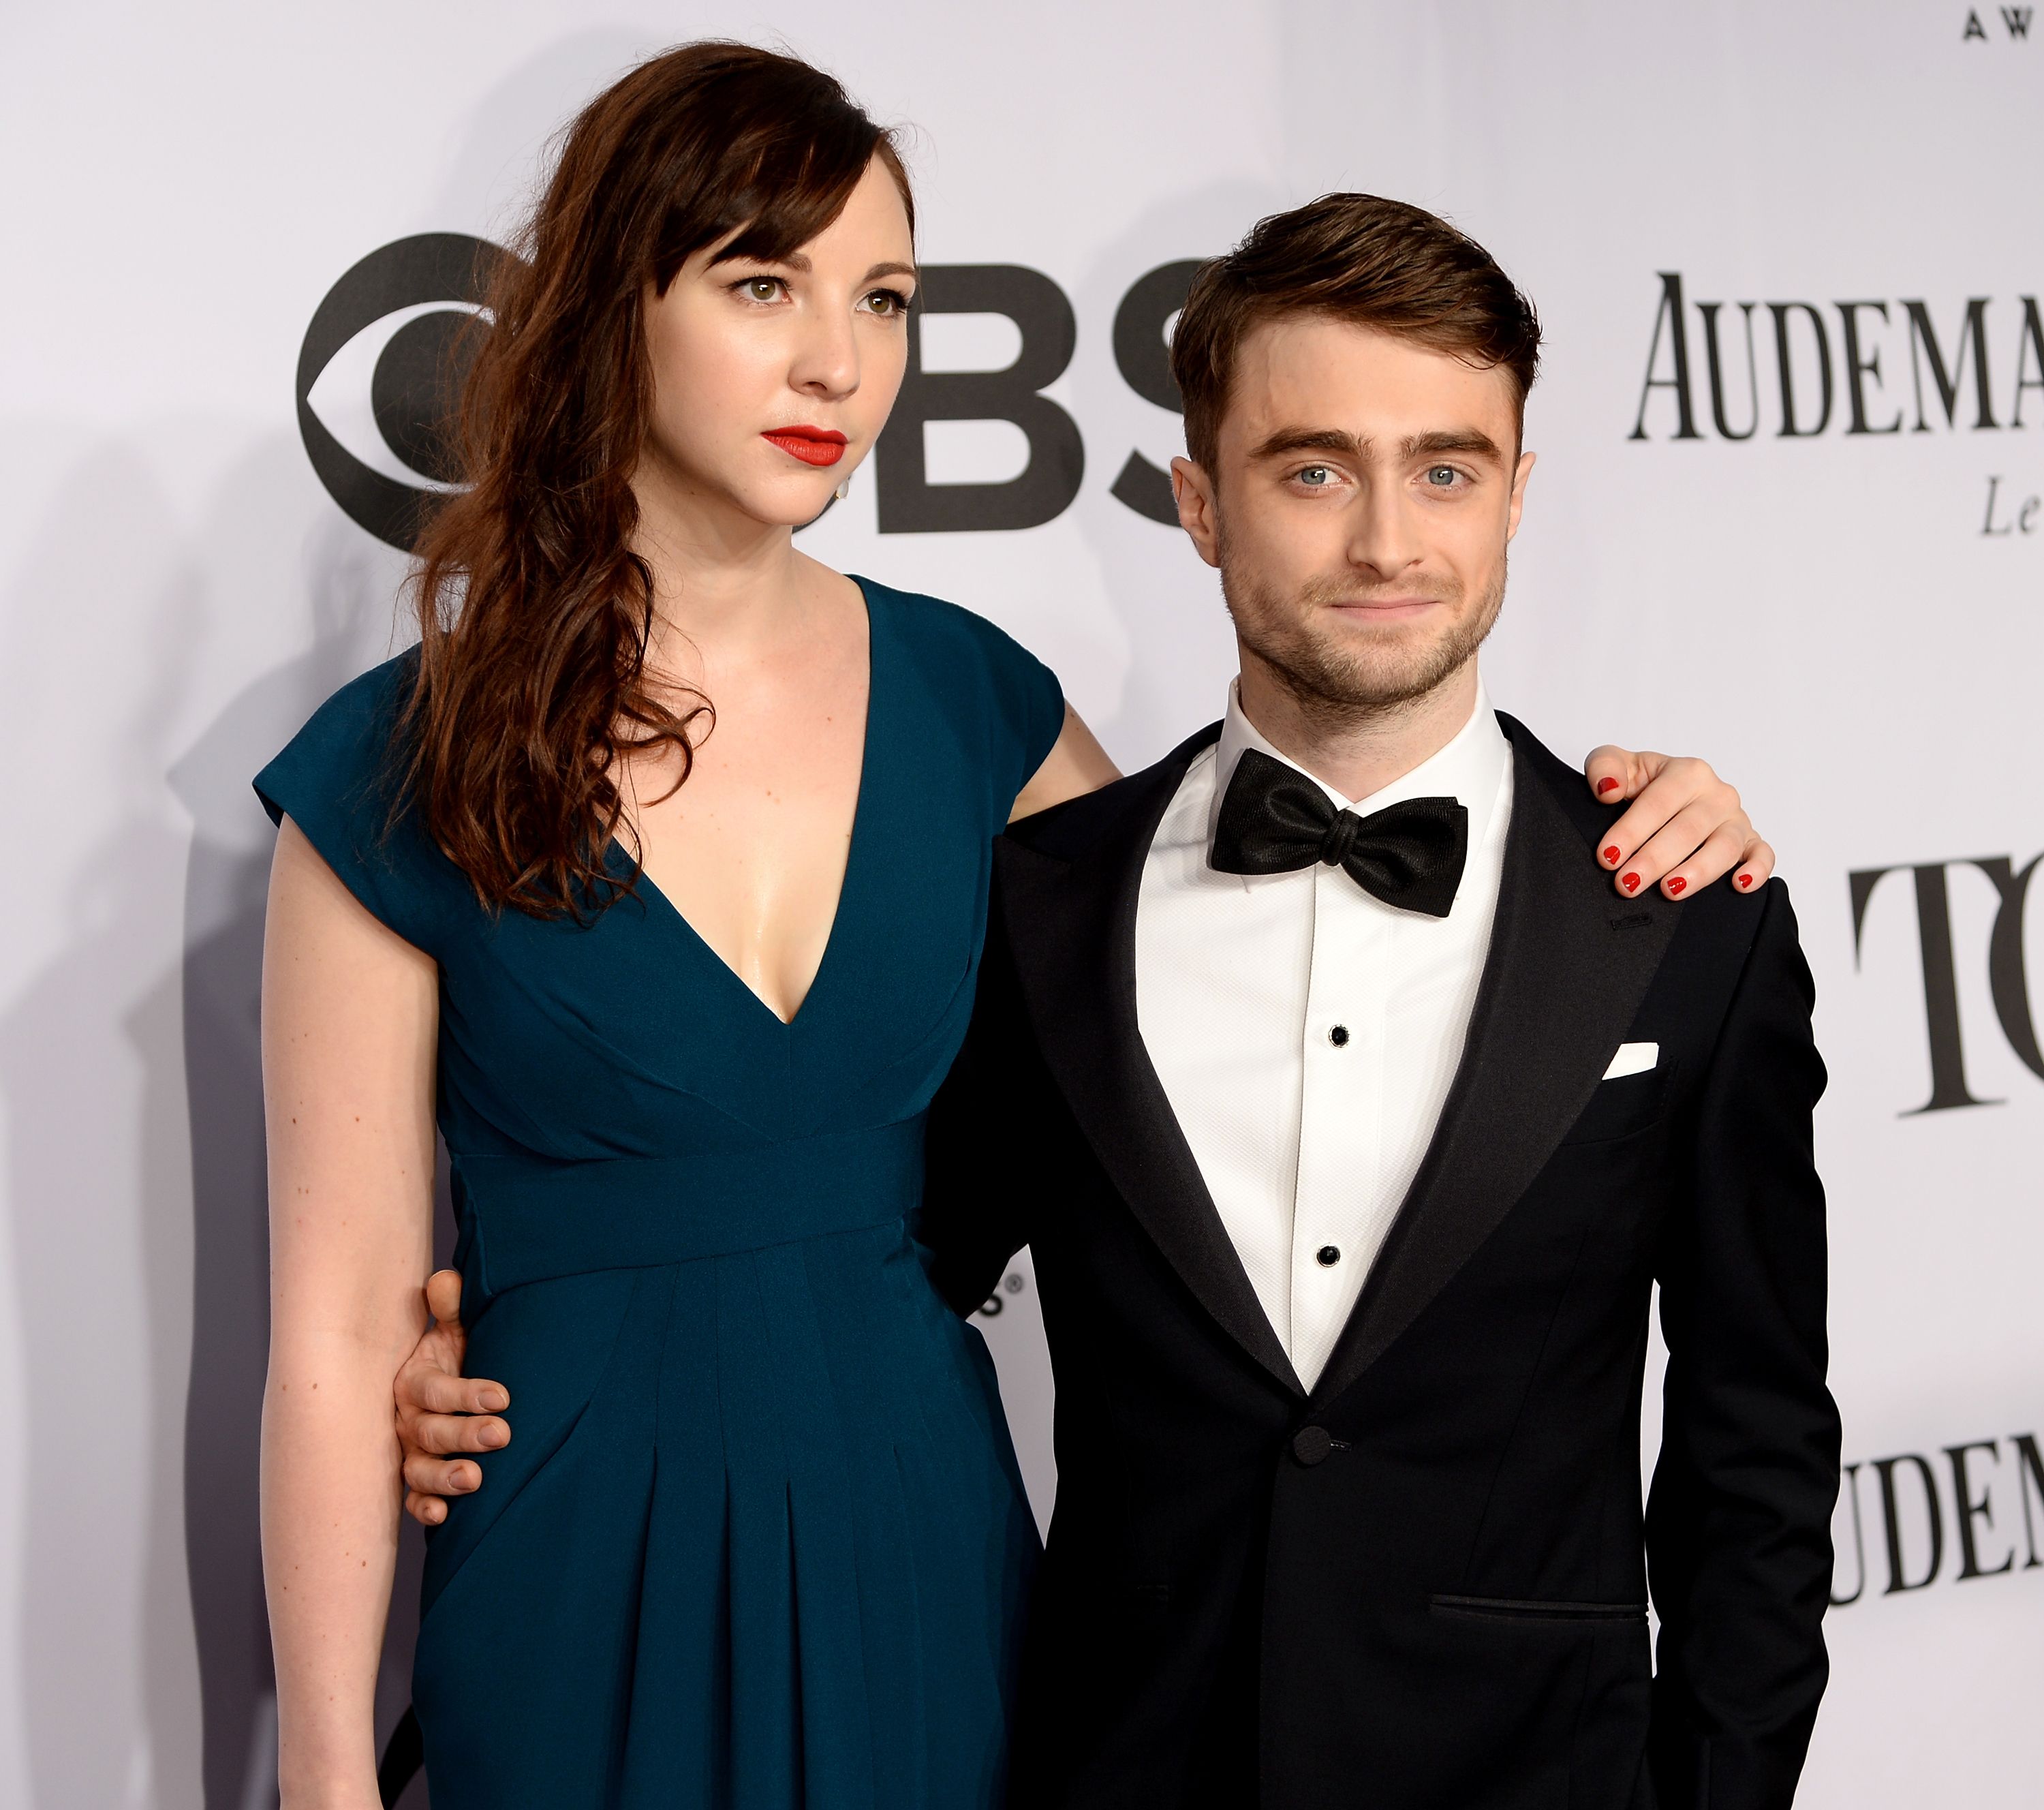 Daniel Radcliffe and Erin Darke on June 8, 2014, in New York City. | Source: Getty Images